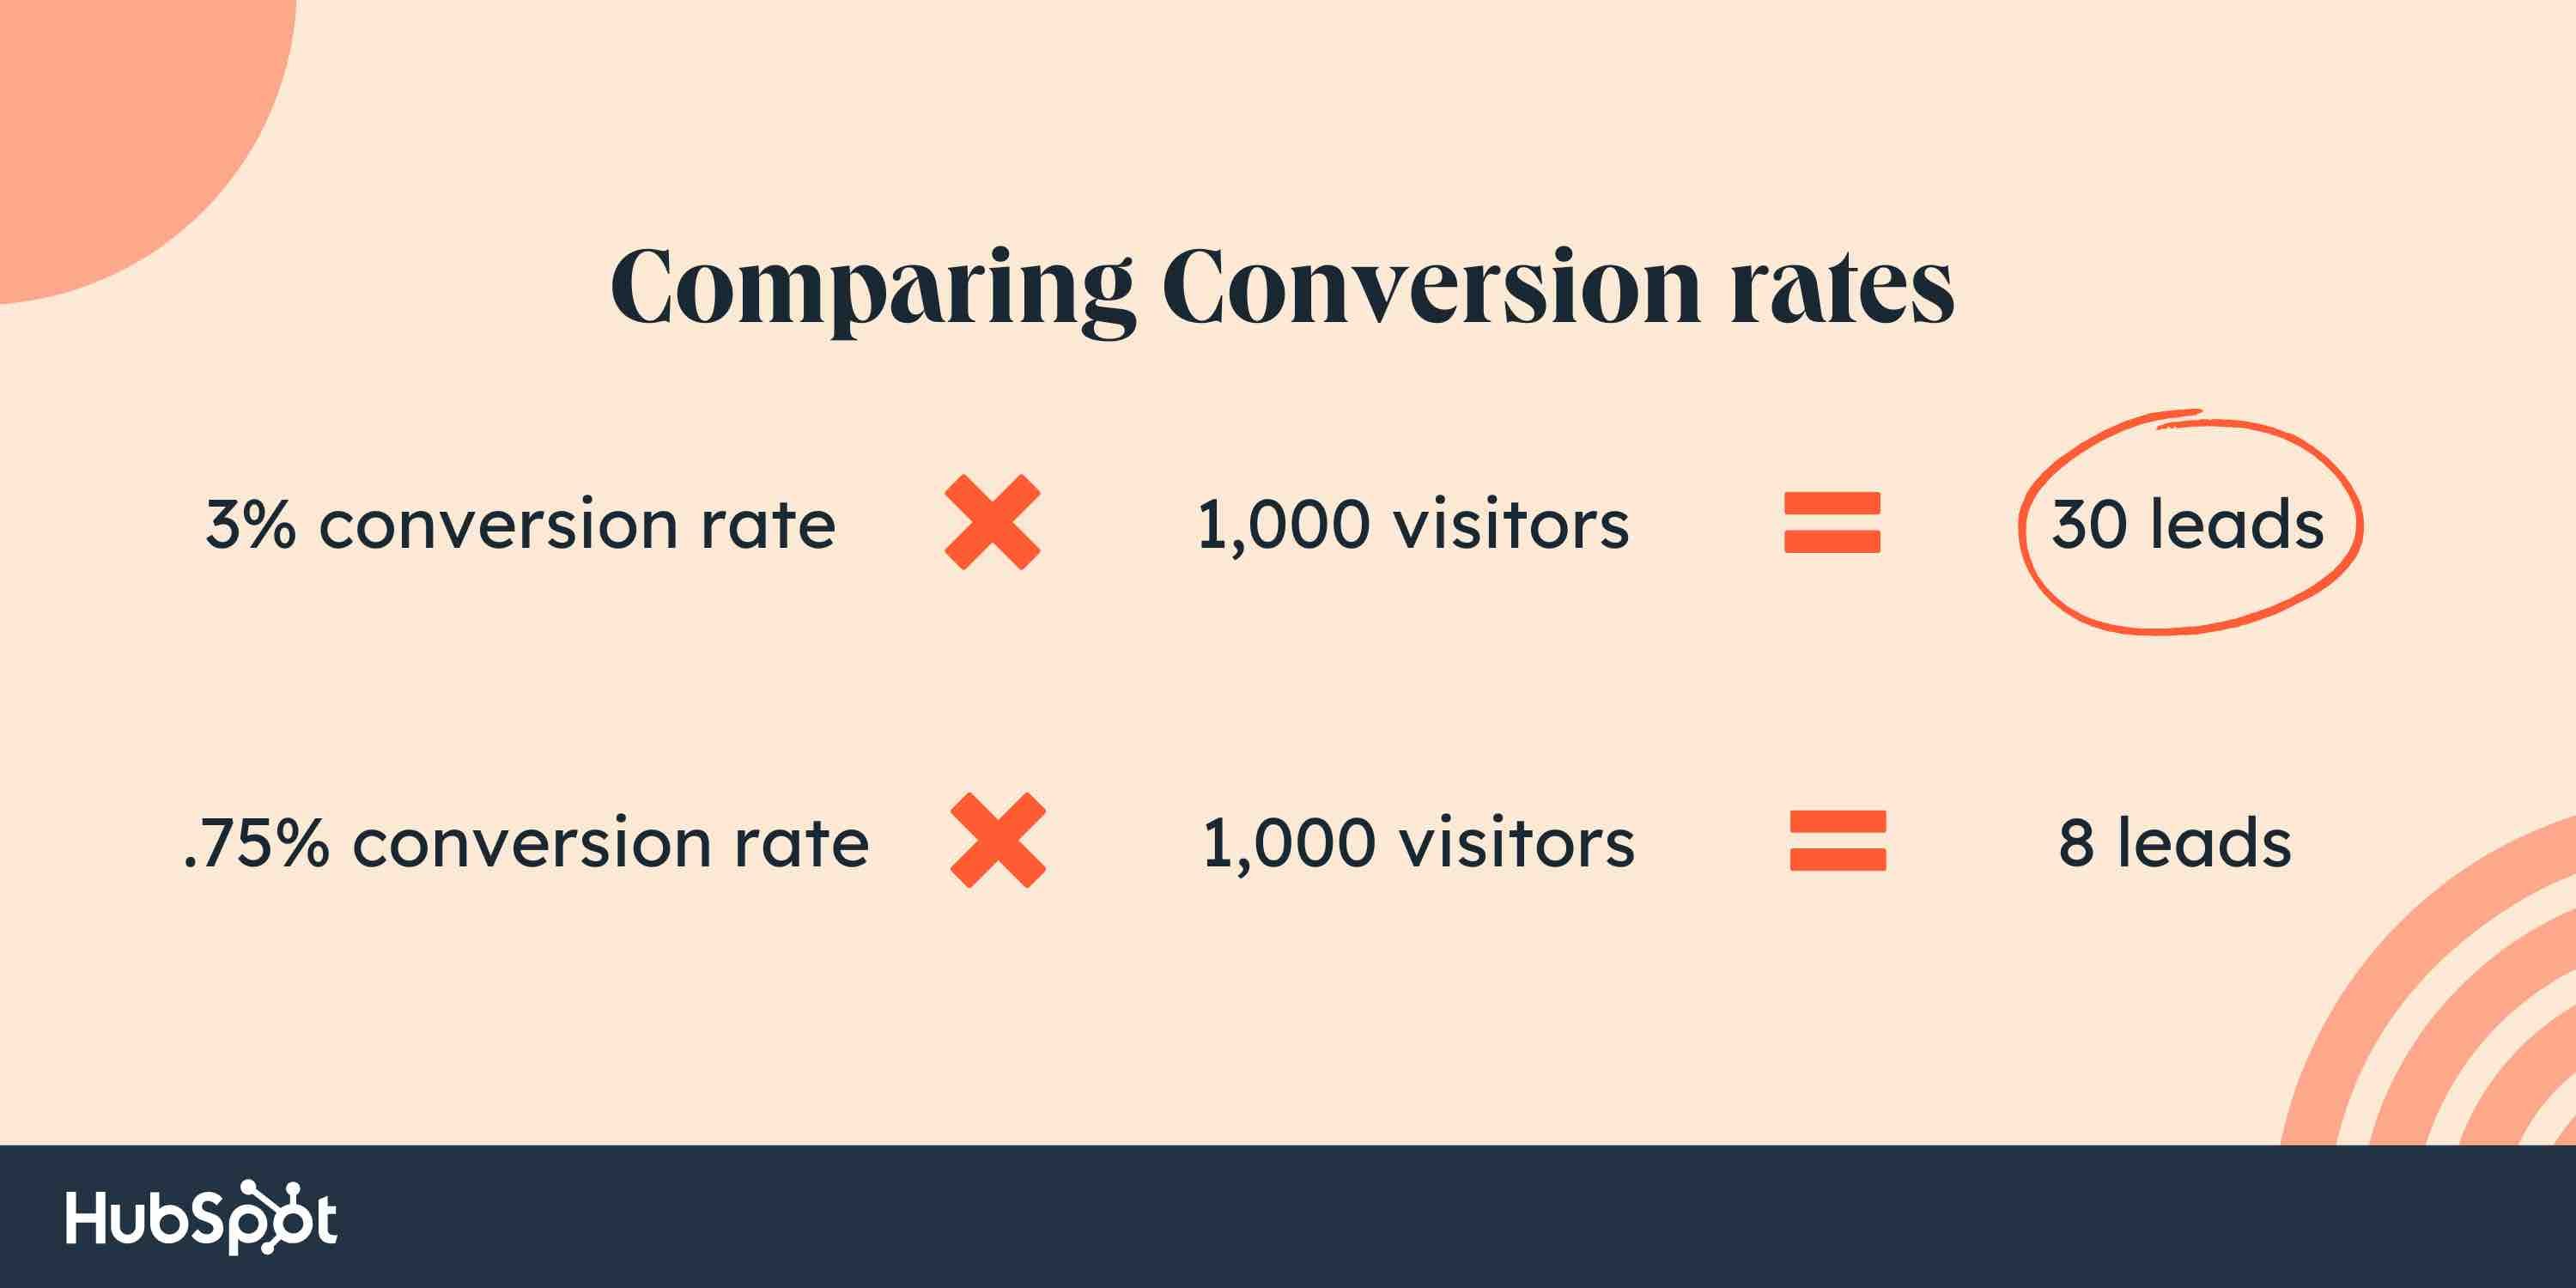 newsletter signup forms examples converion rate comparison.jpg?width=3000&name=newsletter signup forms examples converion rate comparison - How to Increase Email Sign-ups With Better Forms (+Examples)